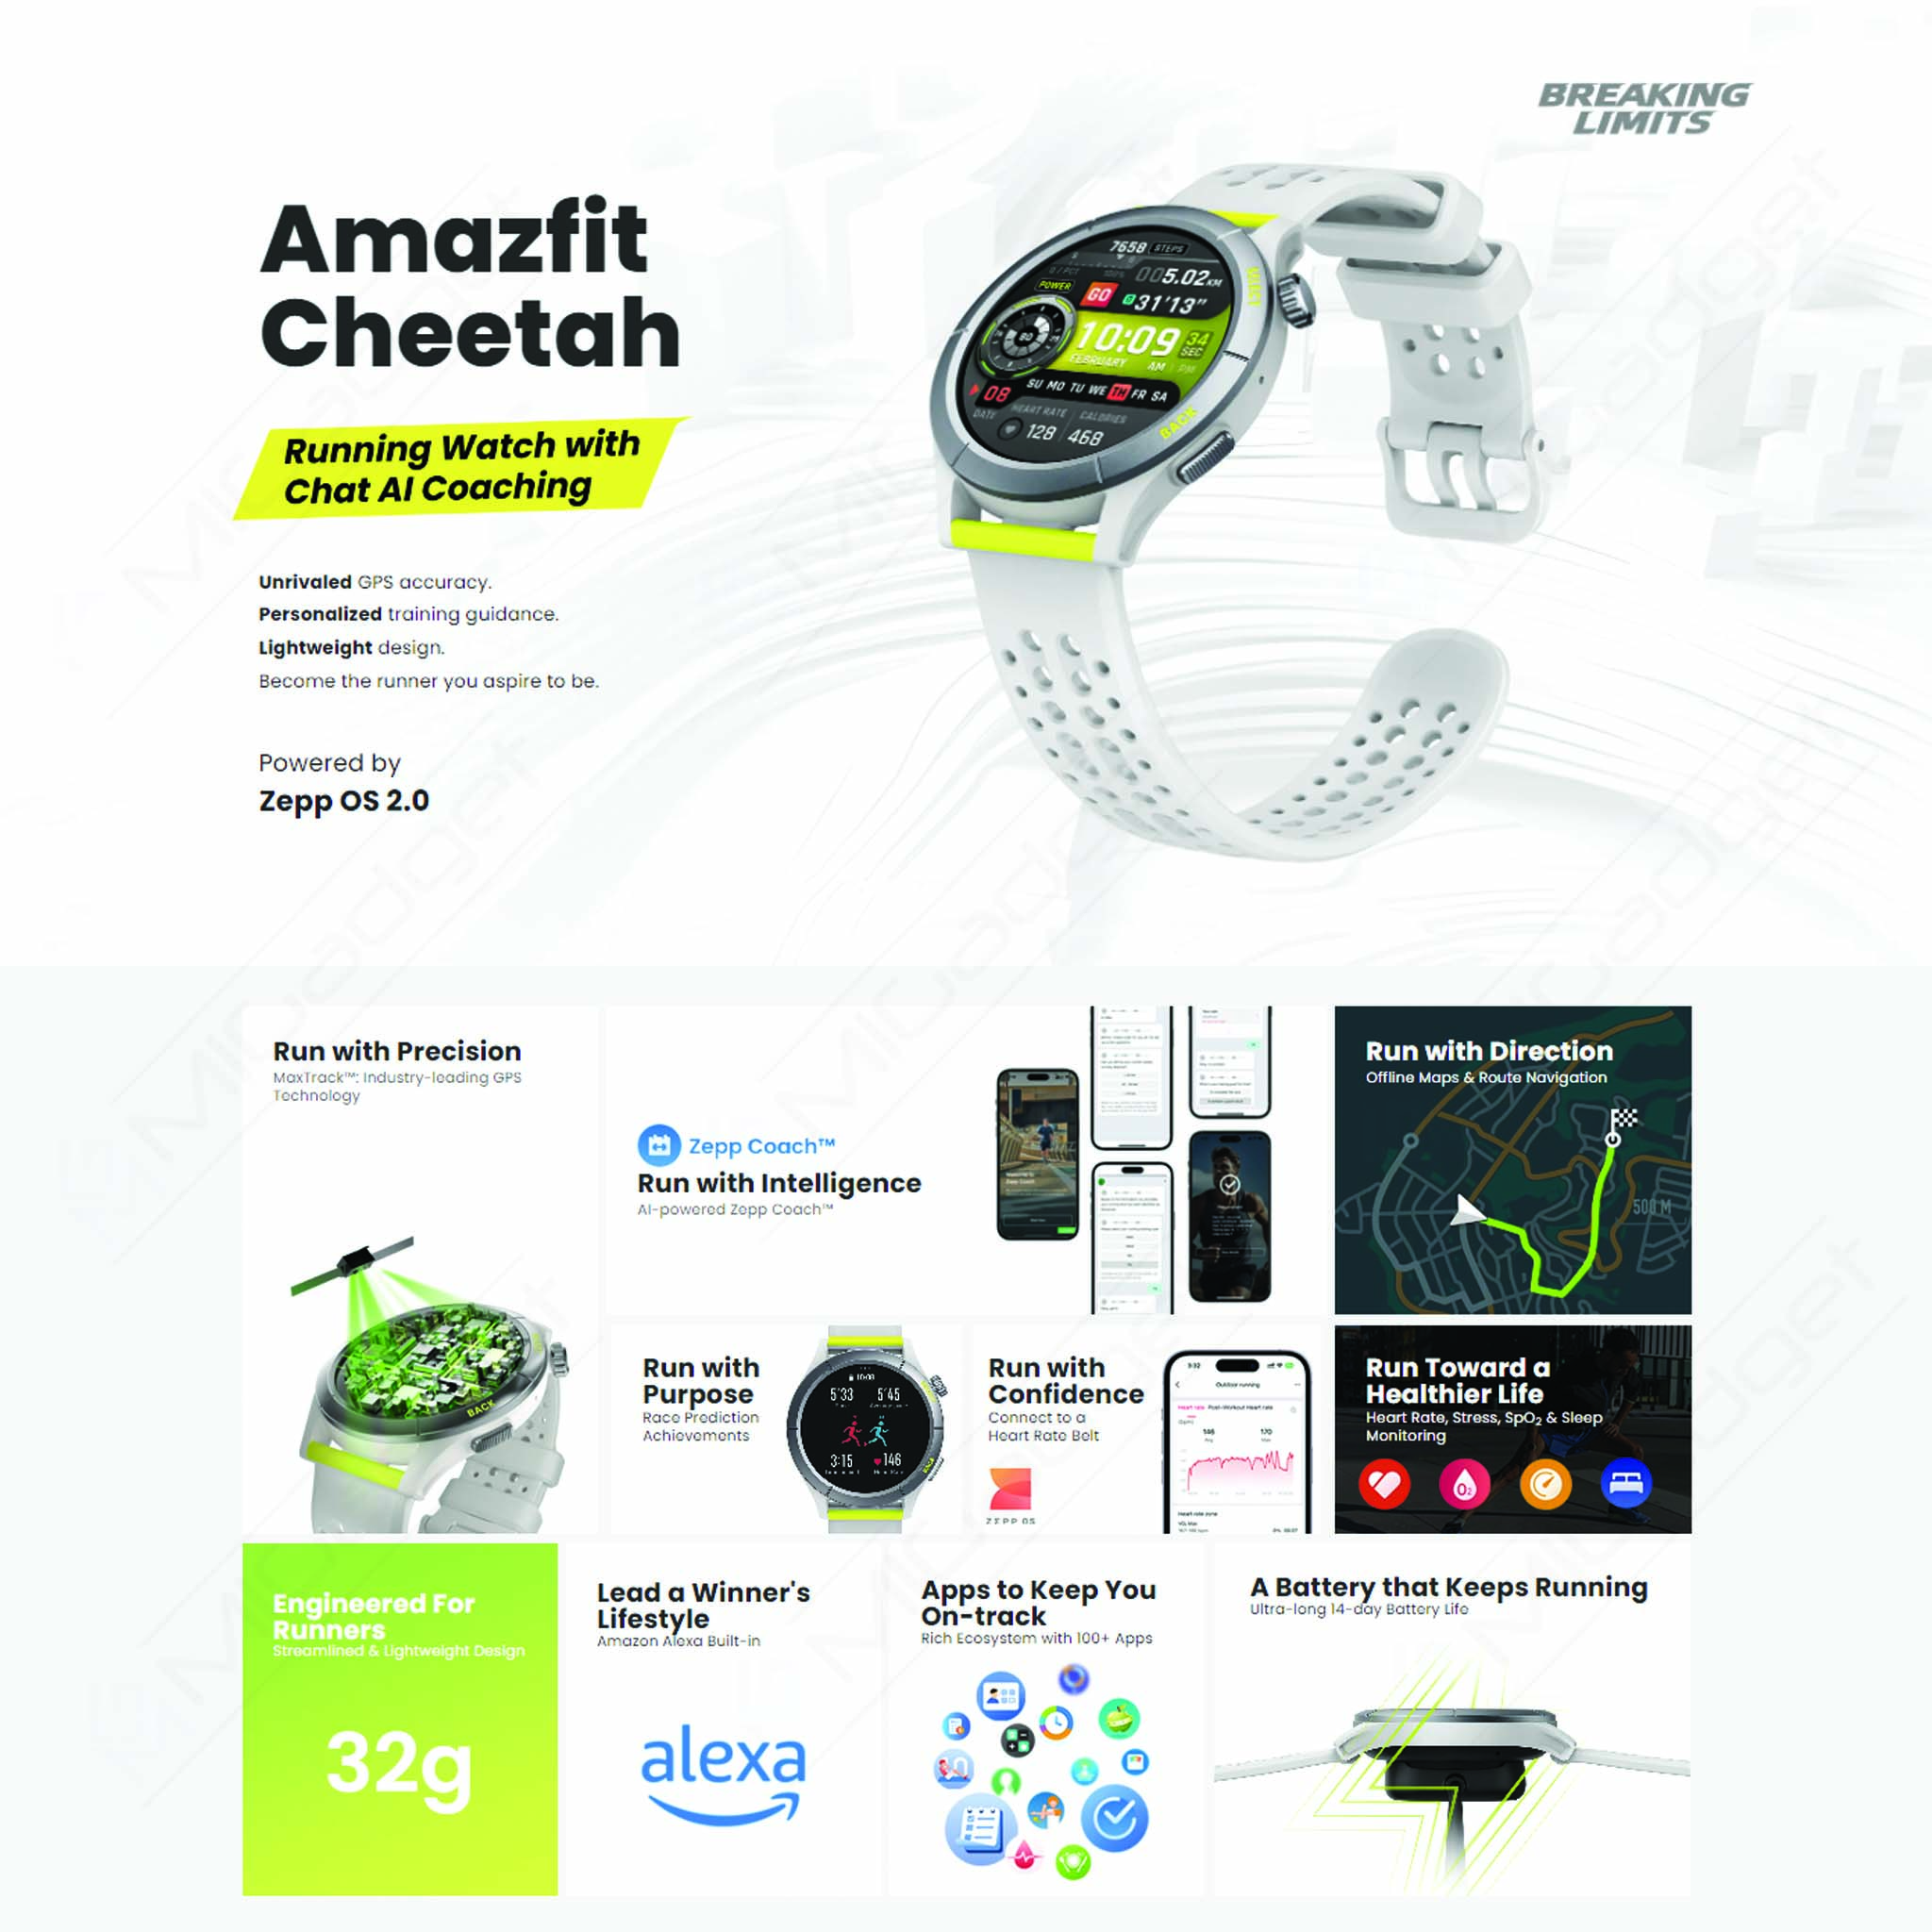 Amazfit Cheetah and Cheetah Pro announced for runners with classic